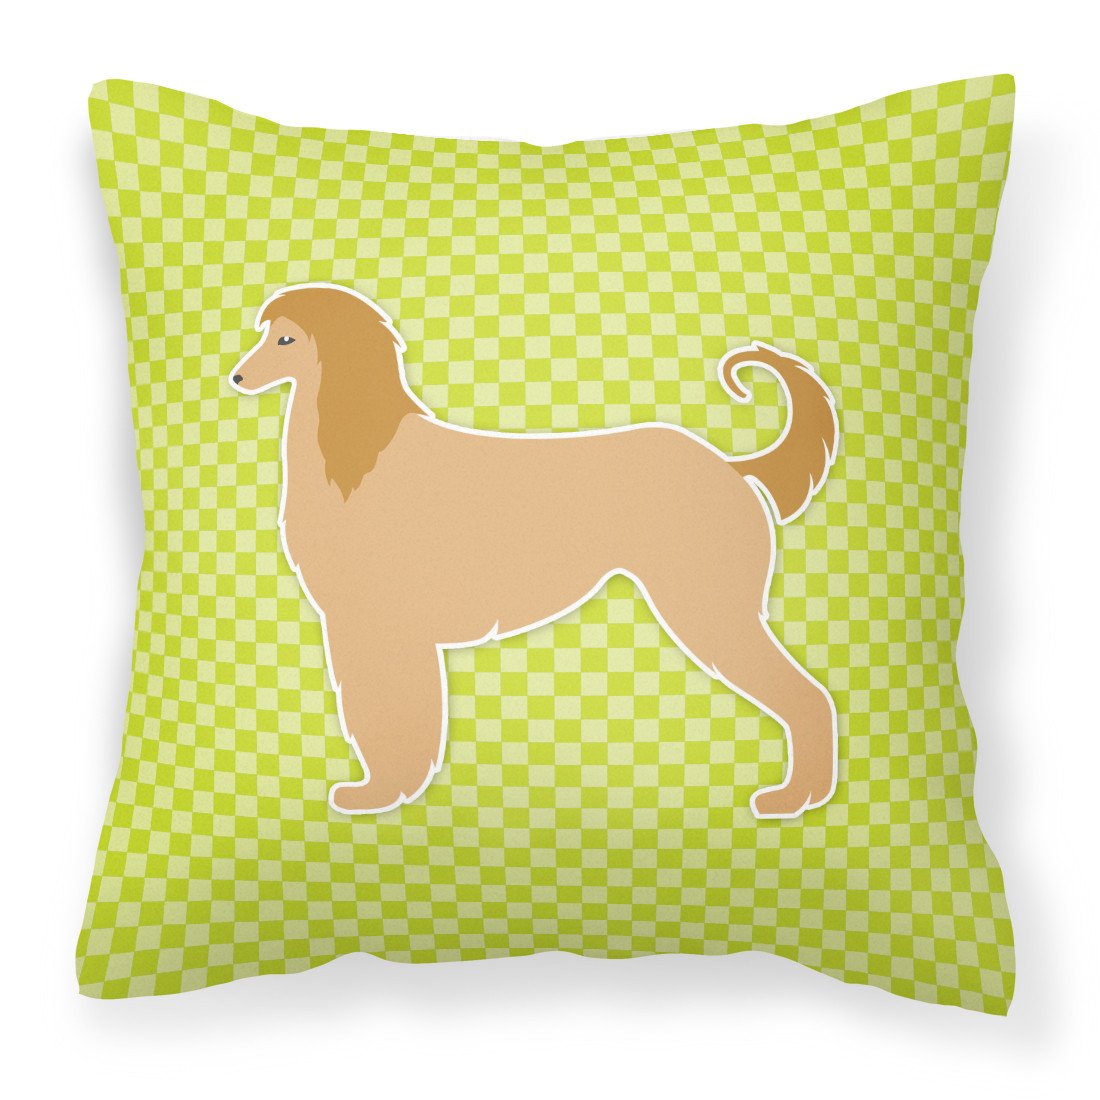 Afghan Hound Checkerboard Green Fabric Decorative Pillow BB3806PW1818 by Caroline's Treasures